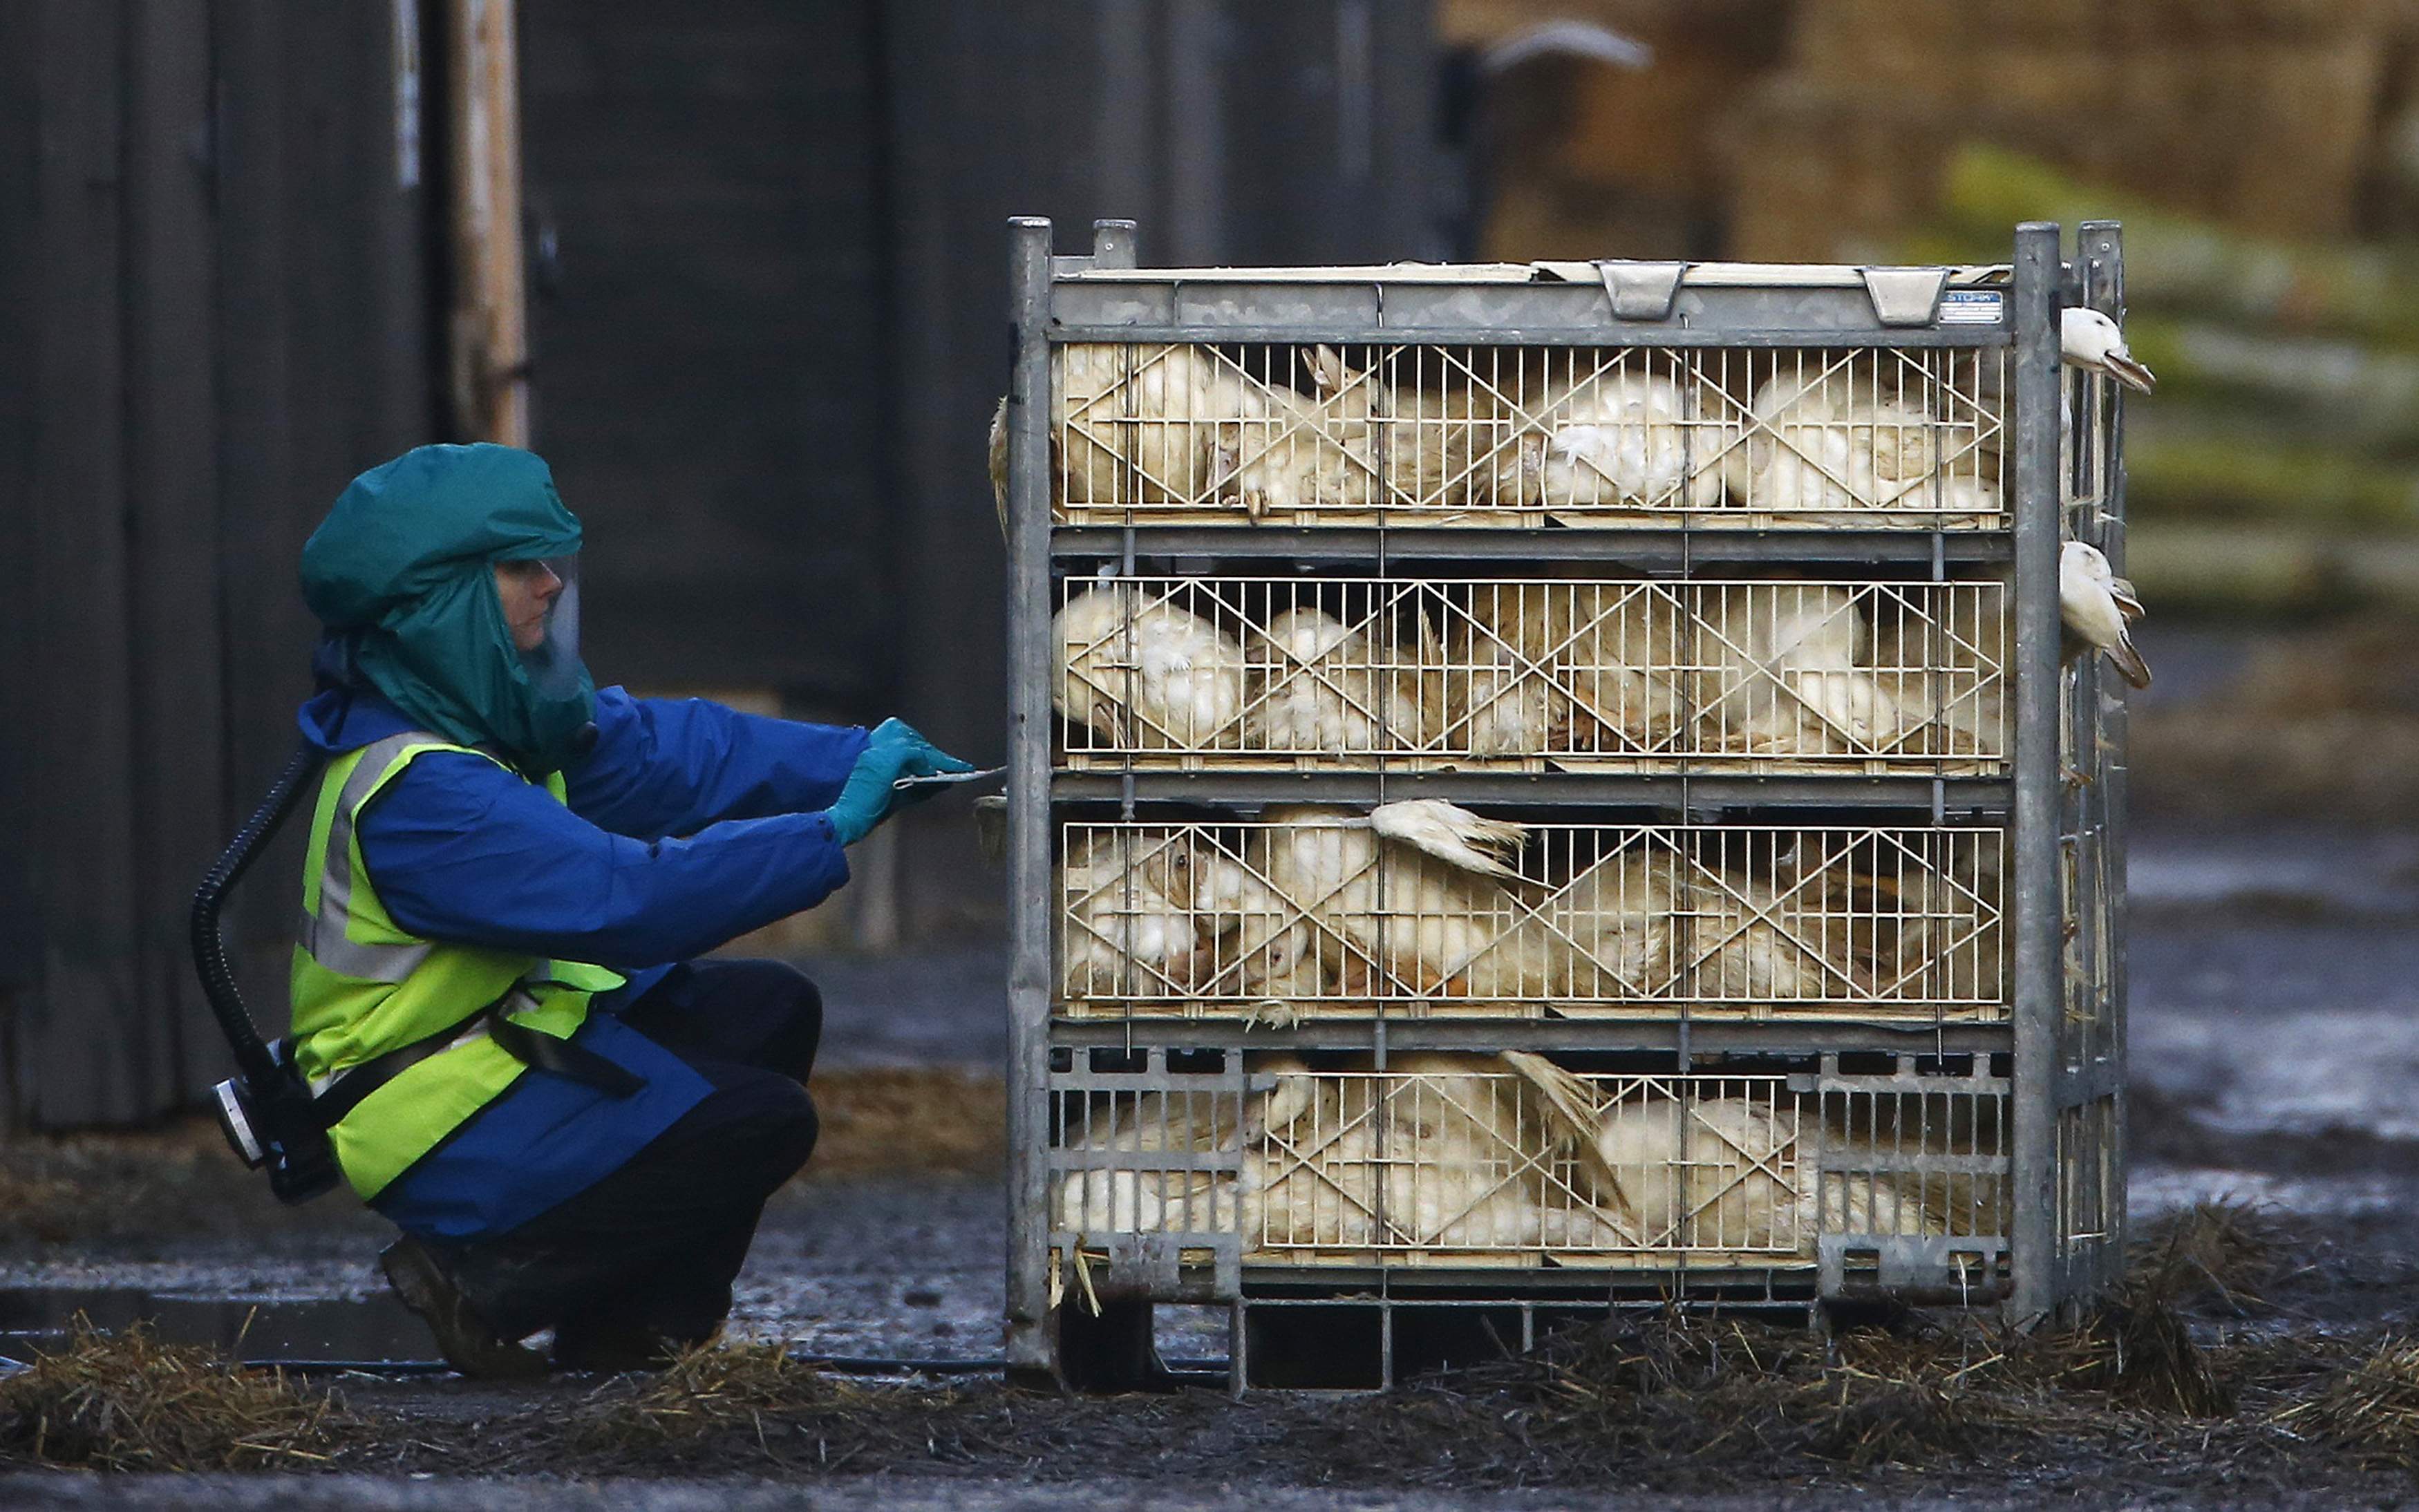 Egyptian dies of H5N1 bird flu, bringing total to seven - health ministry